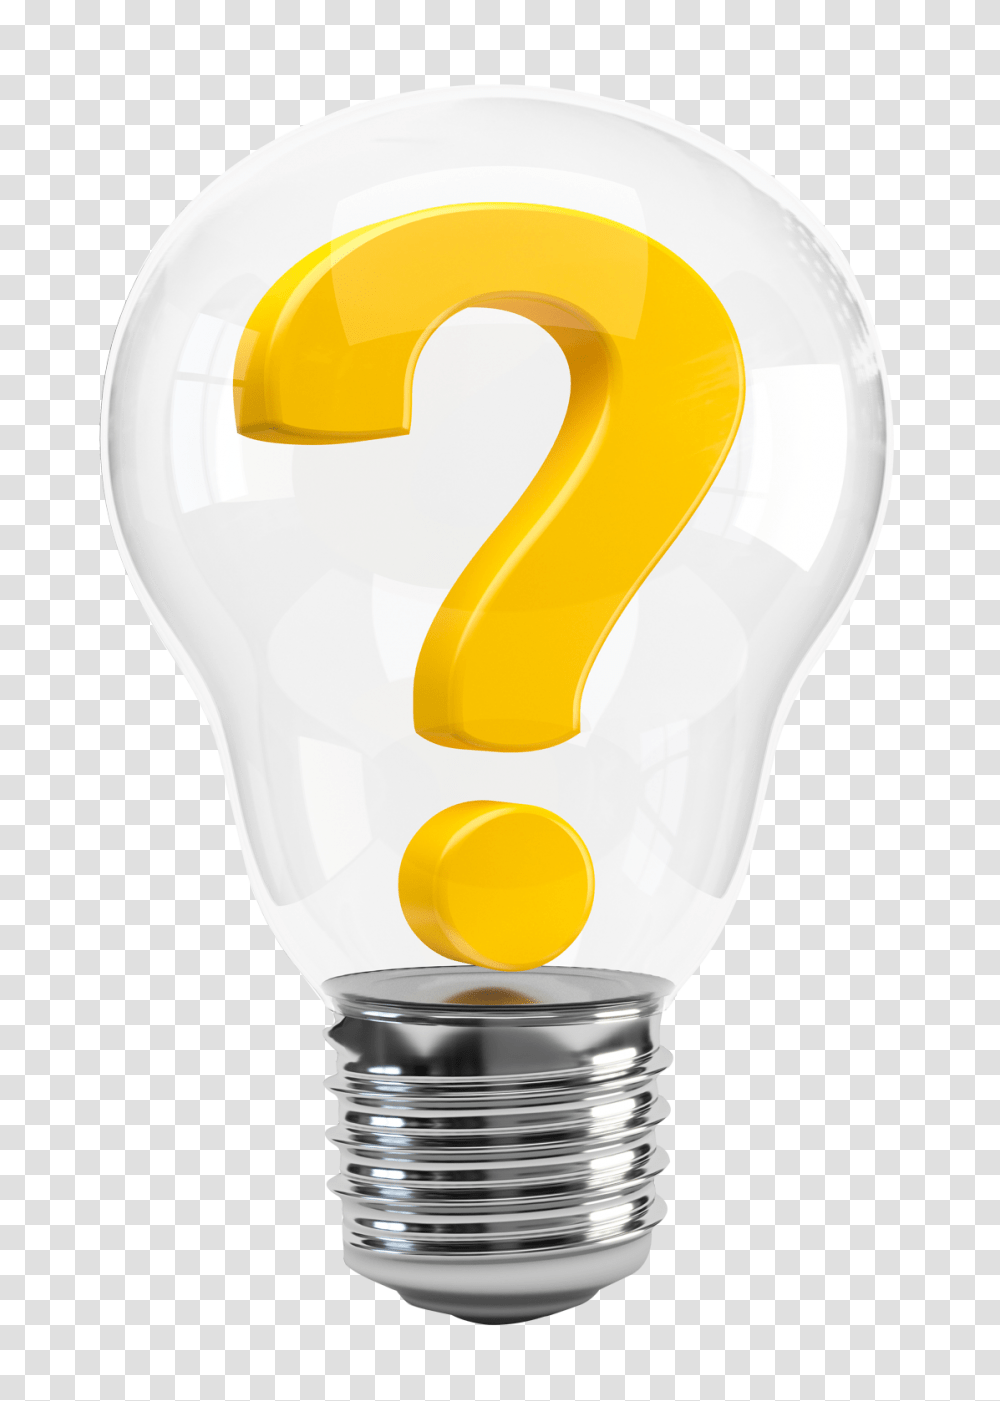 Light Bulb With Question Mark Image, Lightbulb Transparent Png